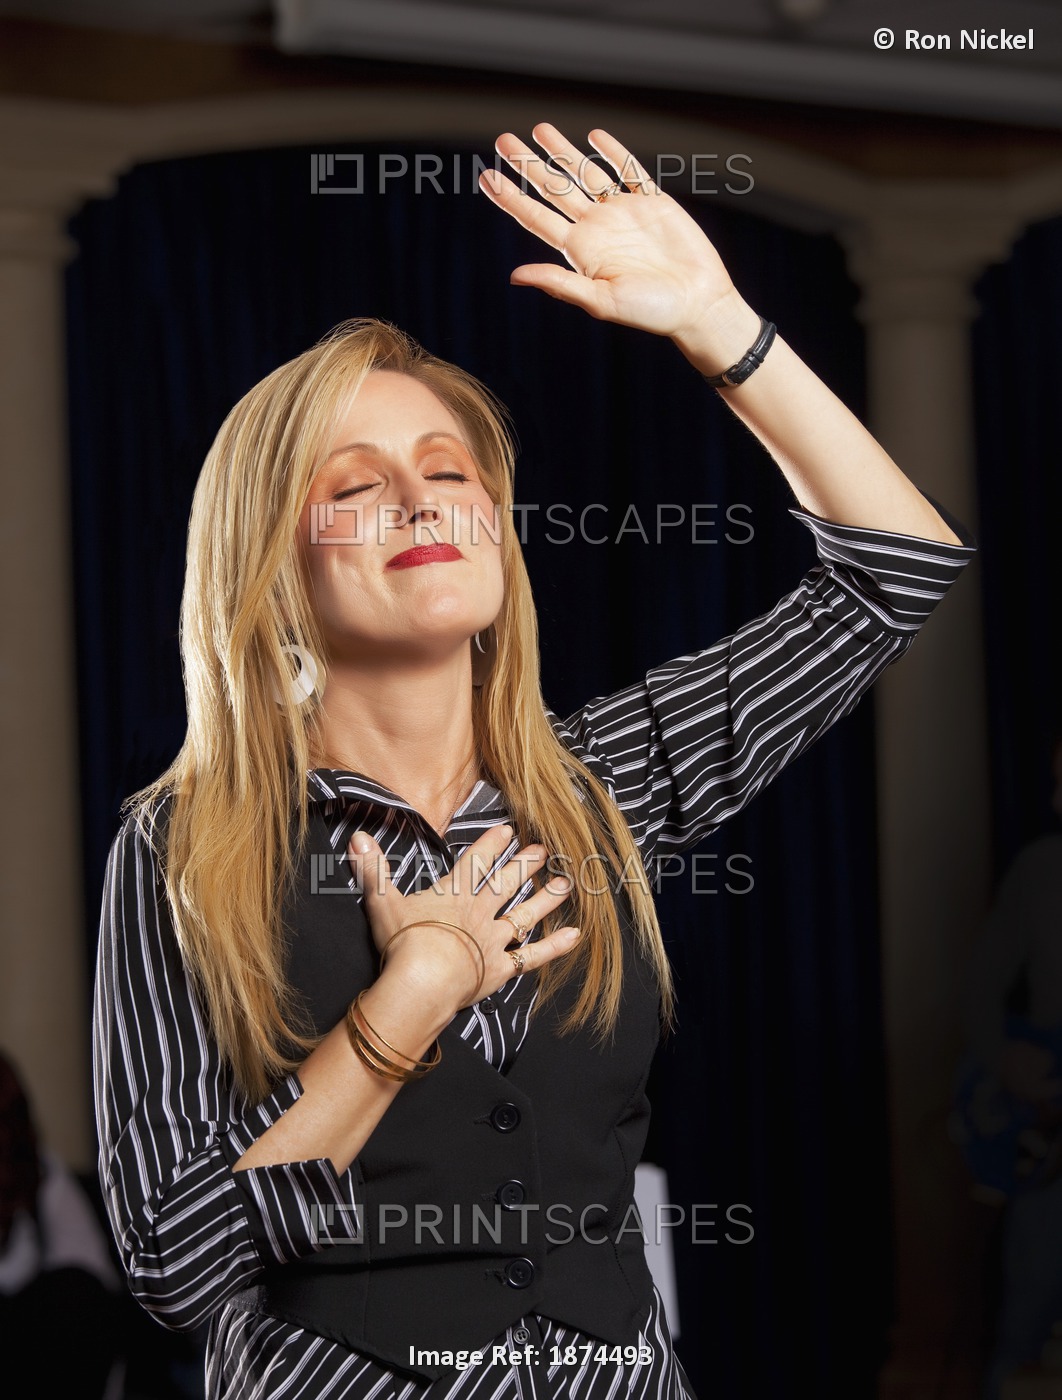 Fort Lauderdale, Florida, United States Of America; A Woman With Her Hand ...